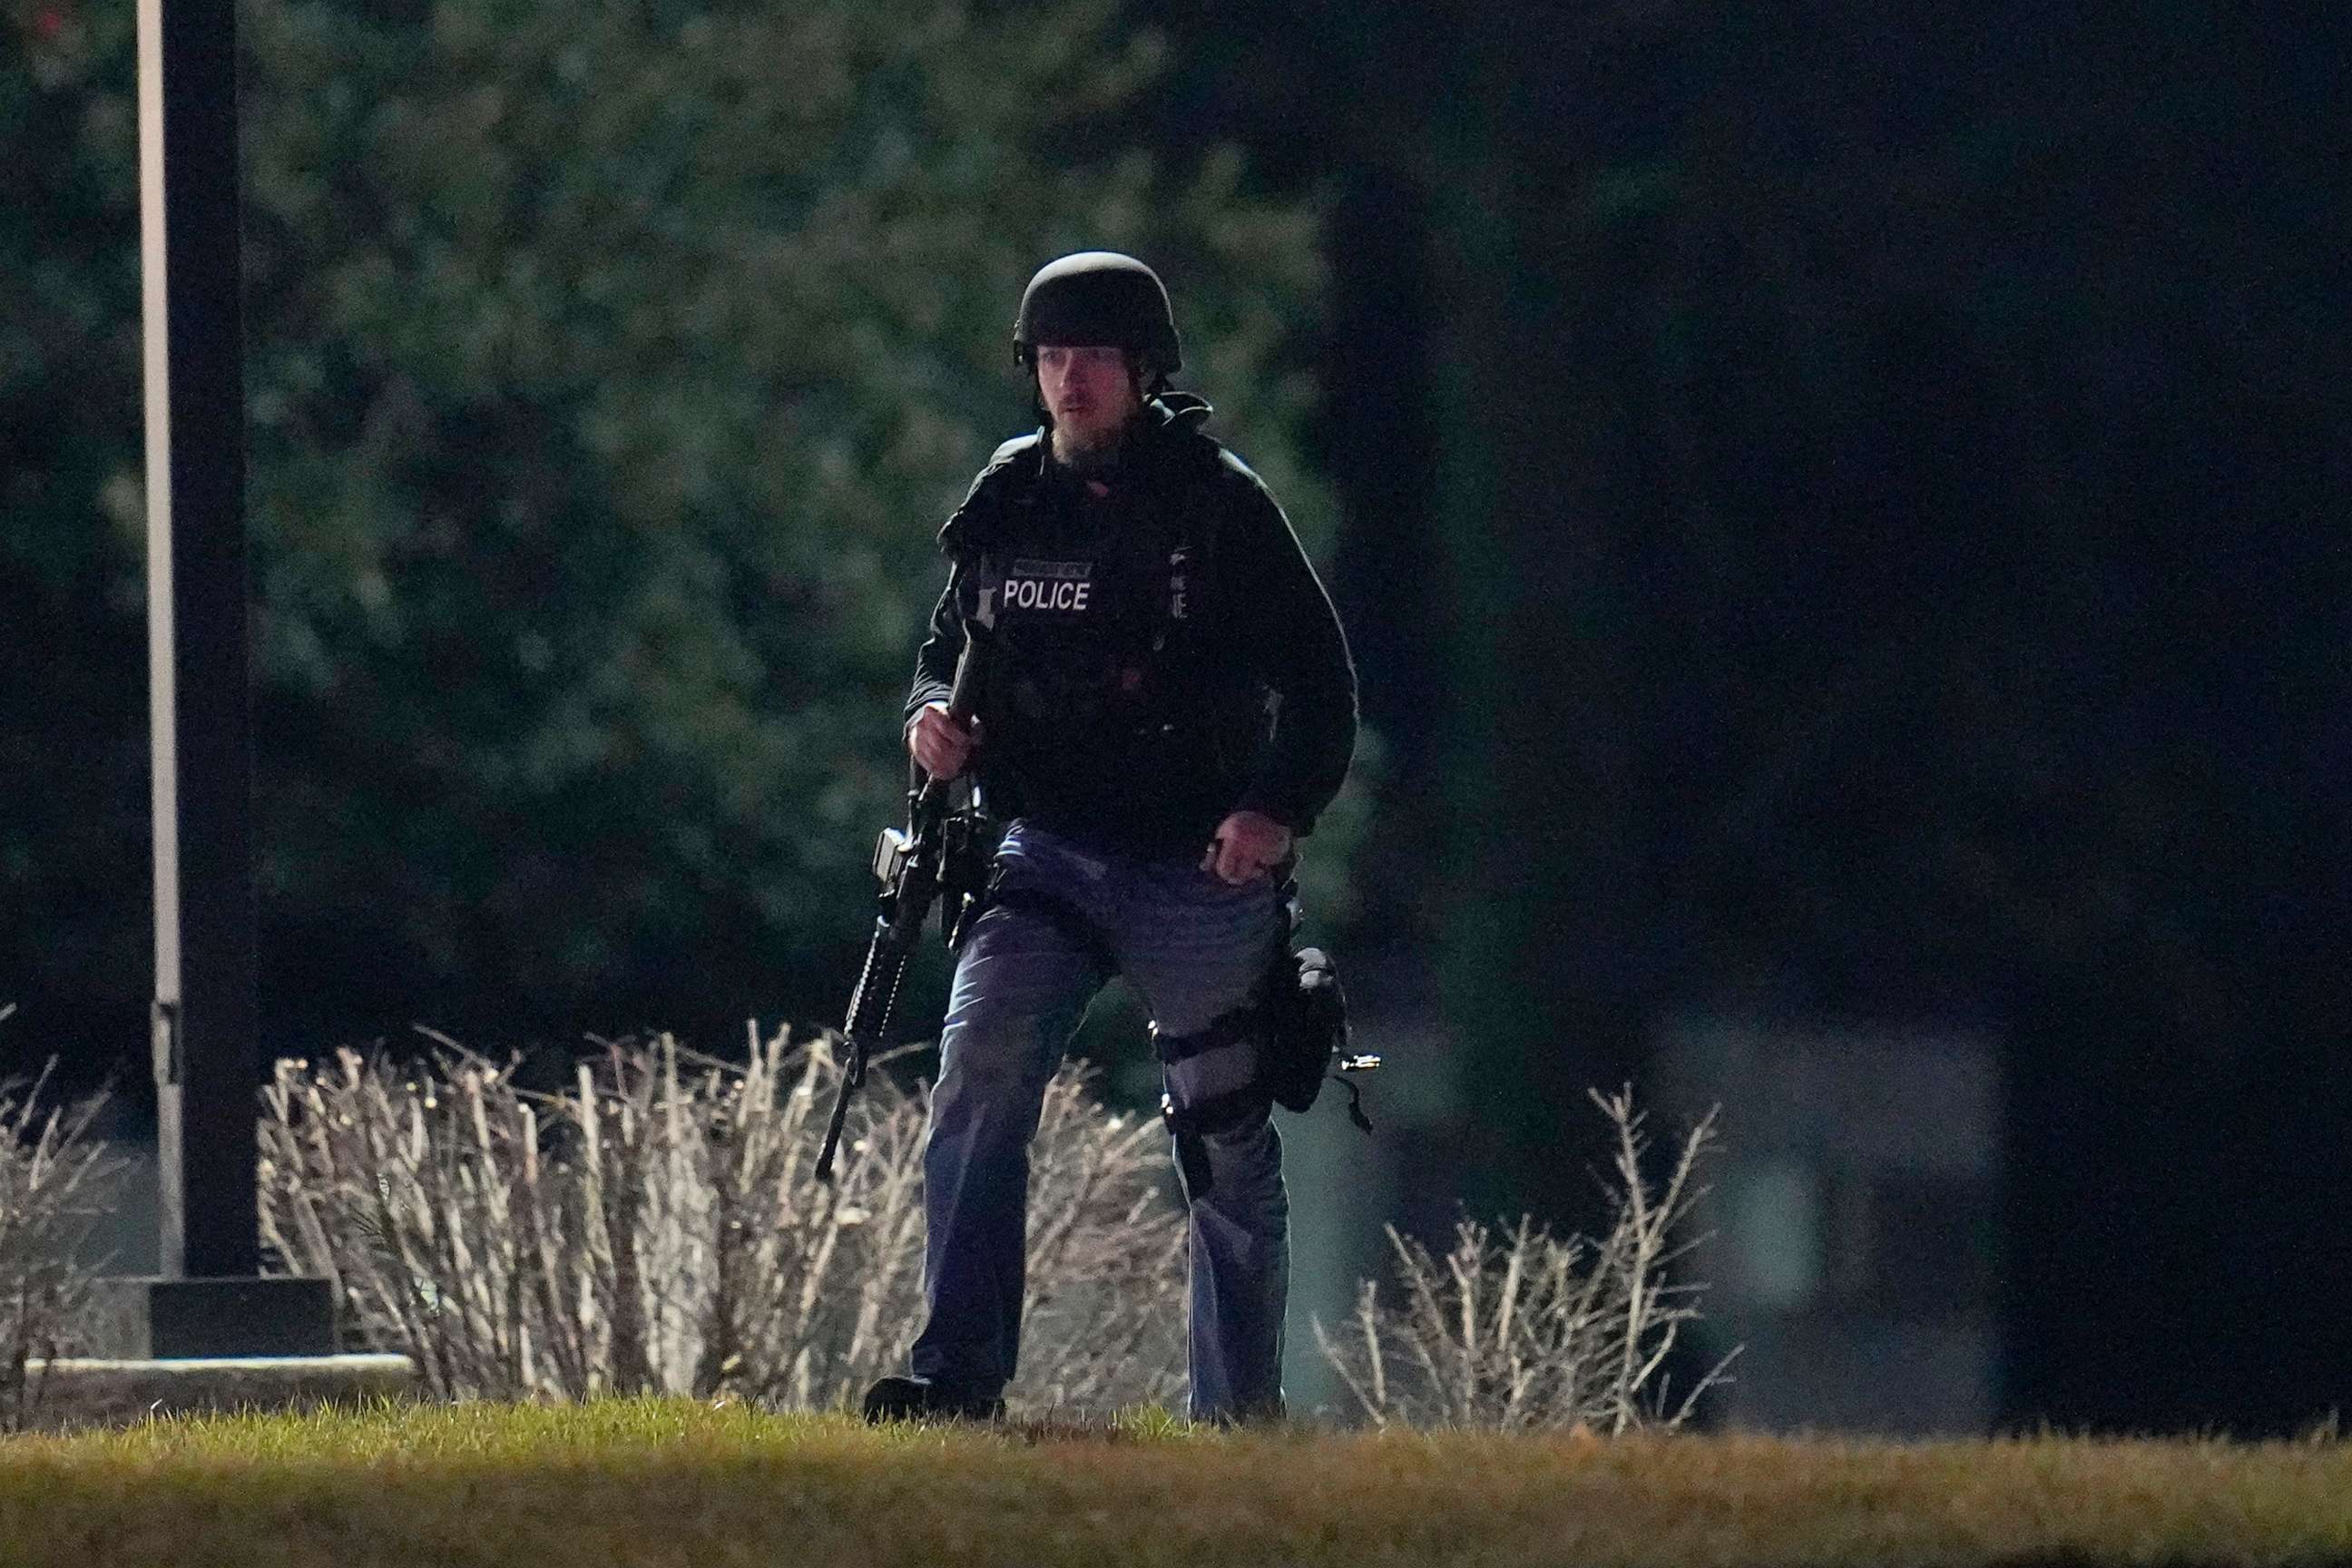 PHOTO: An official walks near a wooded area during a search for a gunman on Feb. 10, 2023, in Fallston, Md.